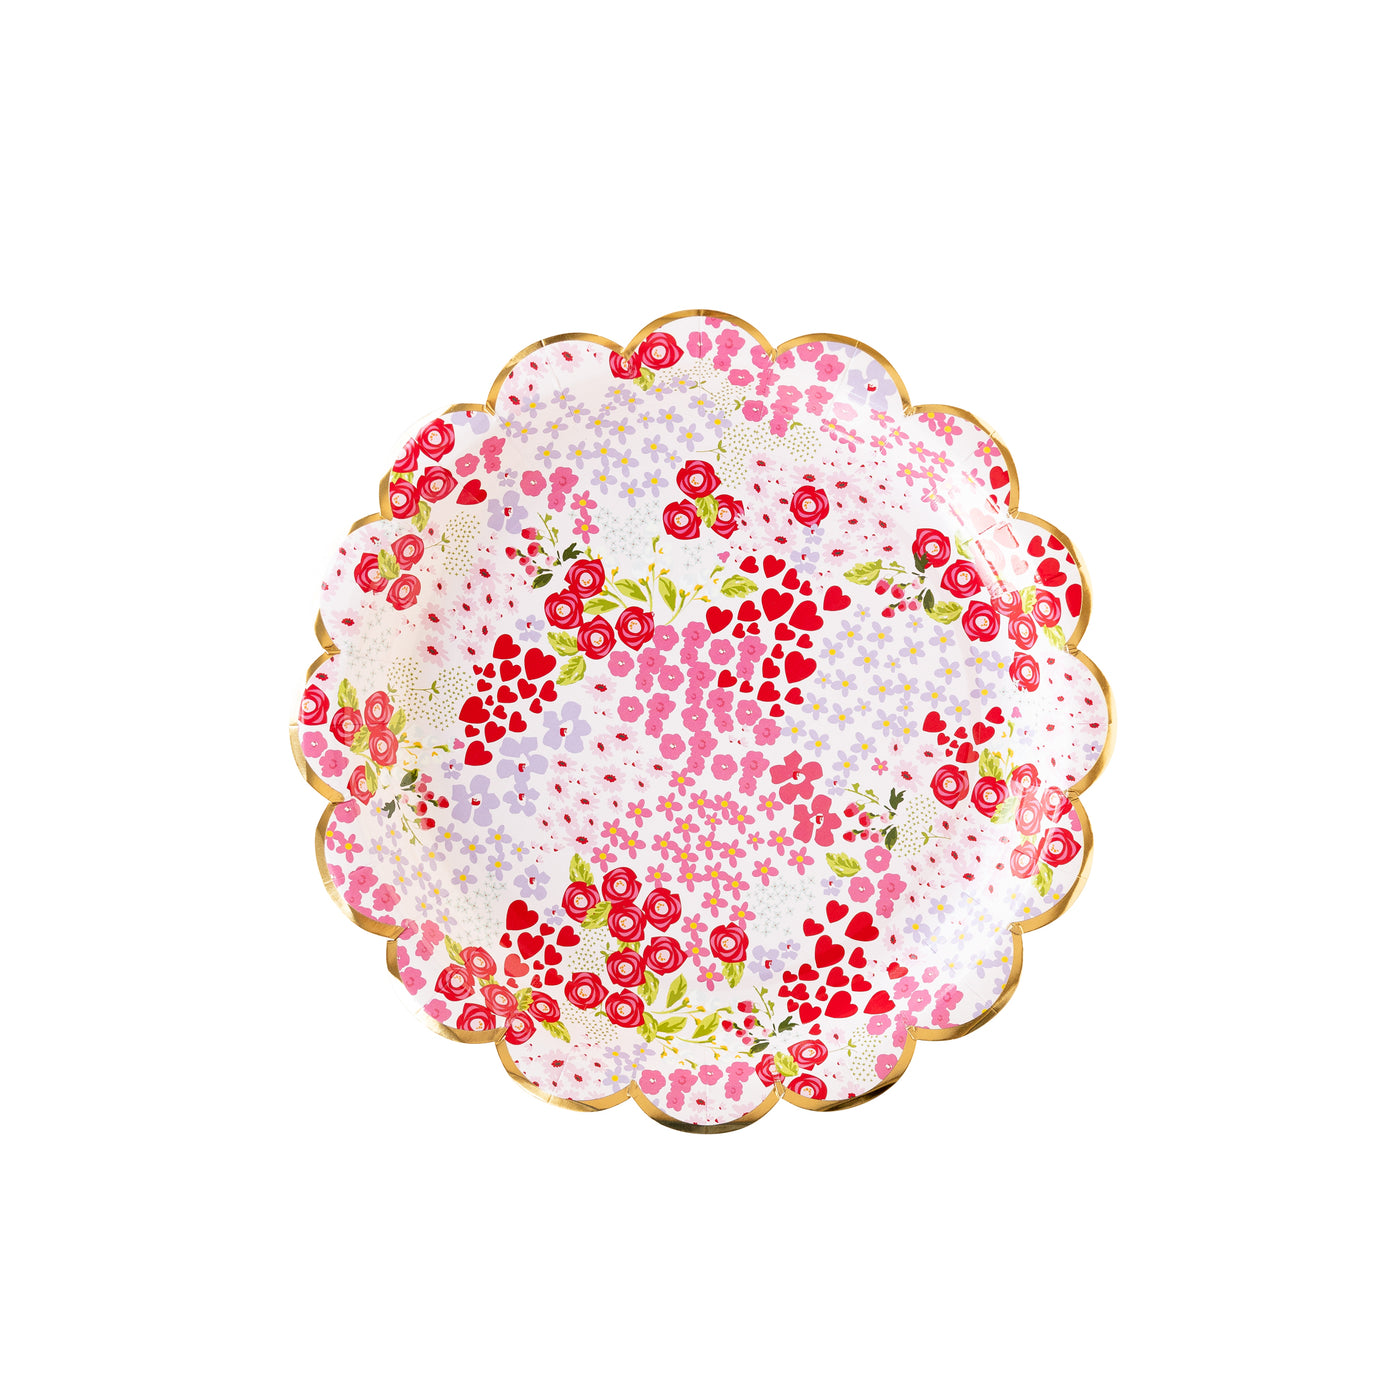 Ditzy Heart & Florals Paper Plate